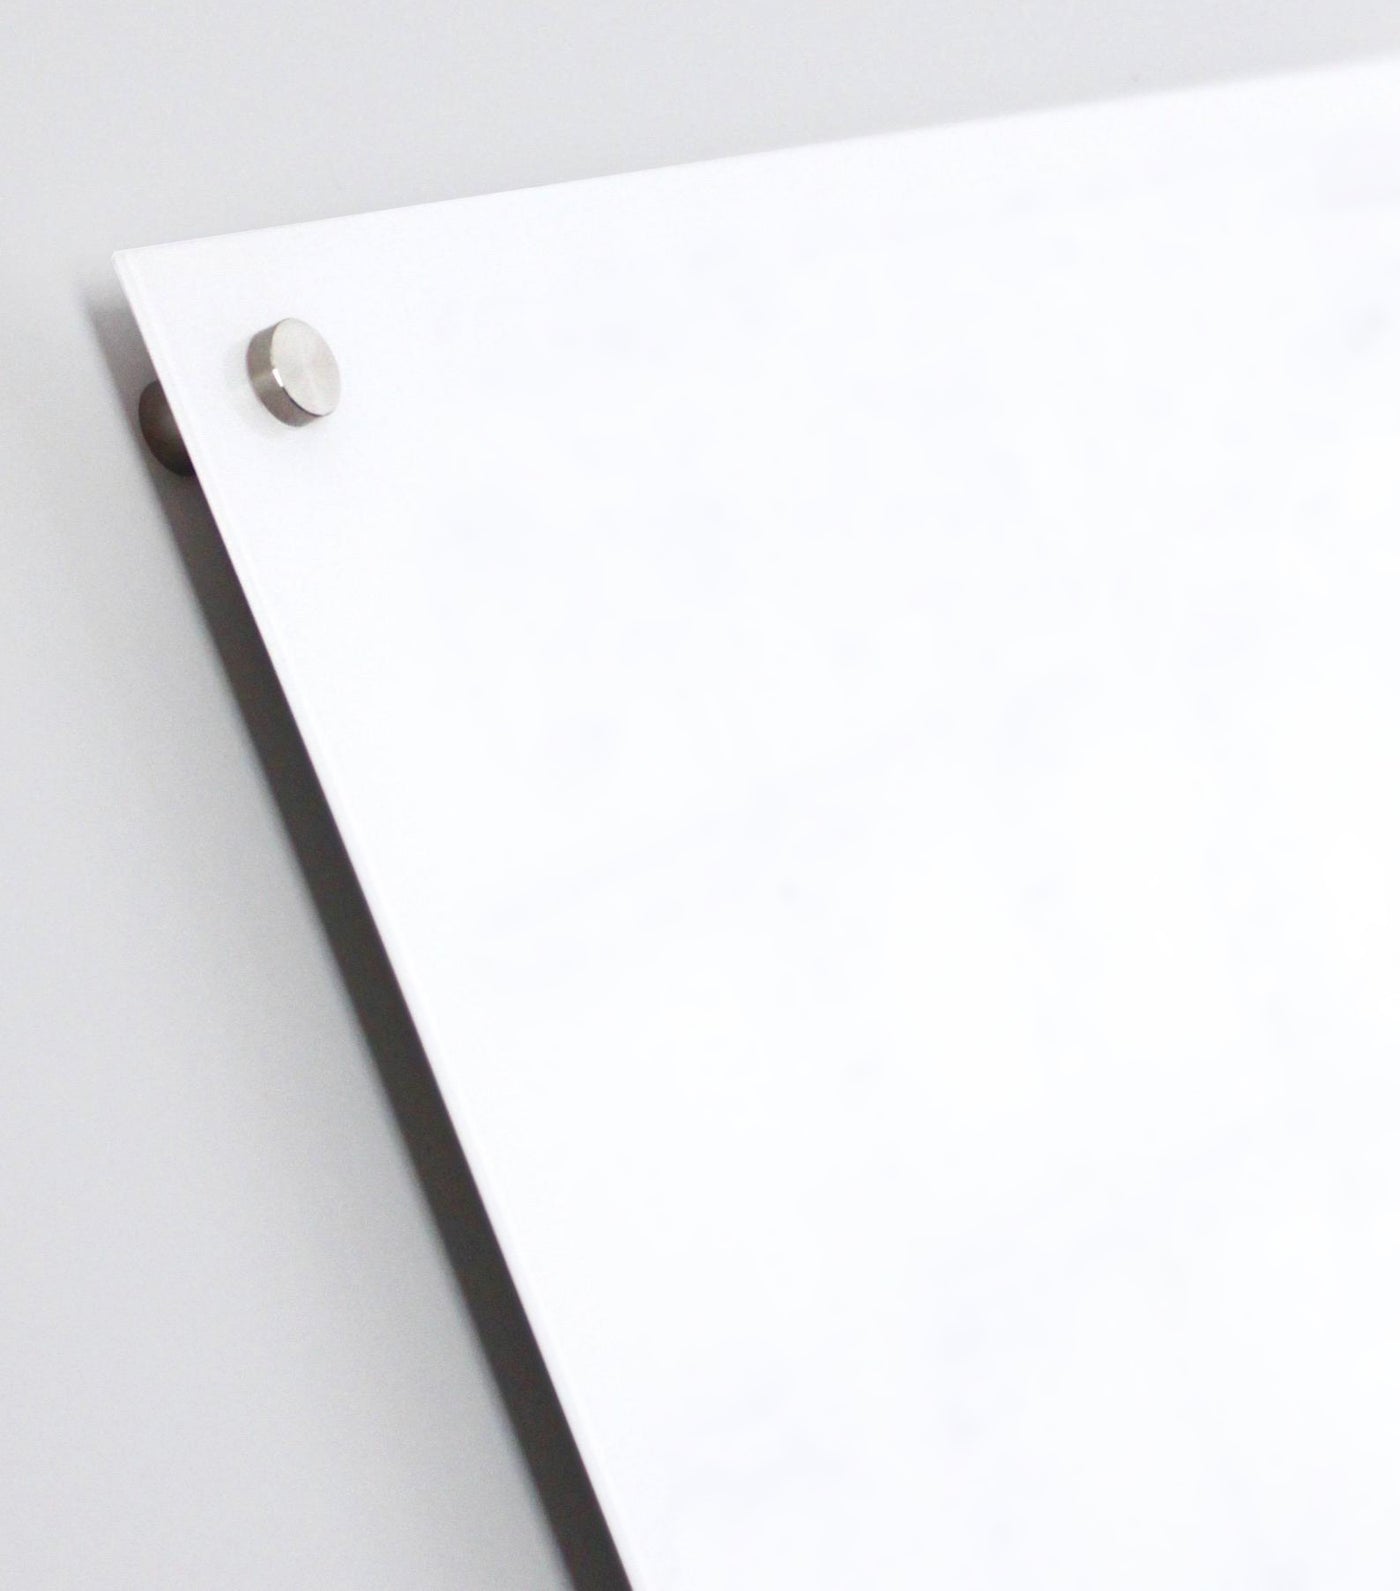 DESIGN YOUR OWN board | Floating White Magnetic Acrylic Business Board